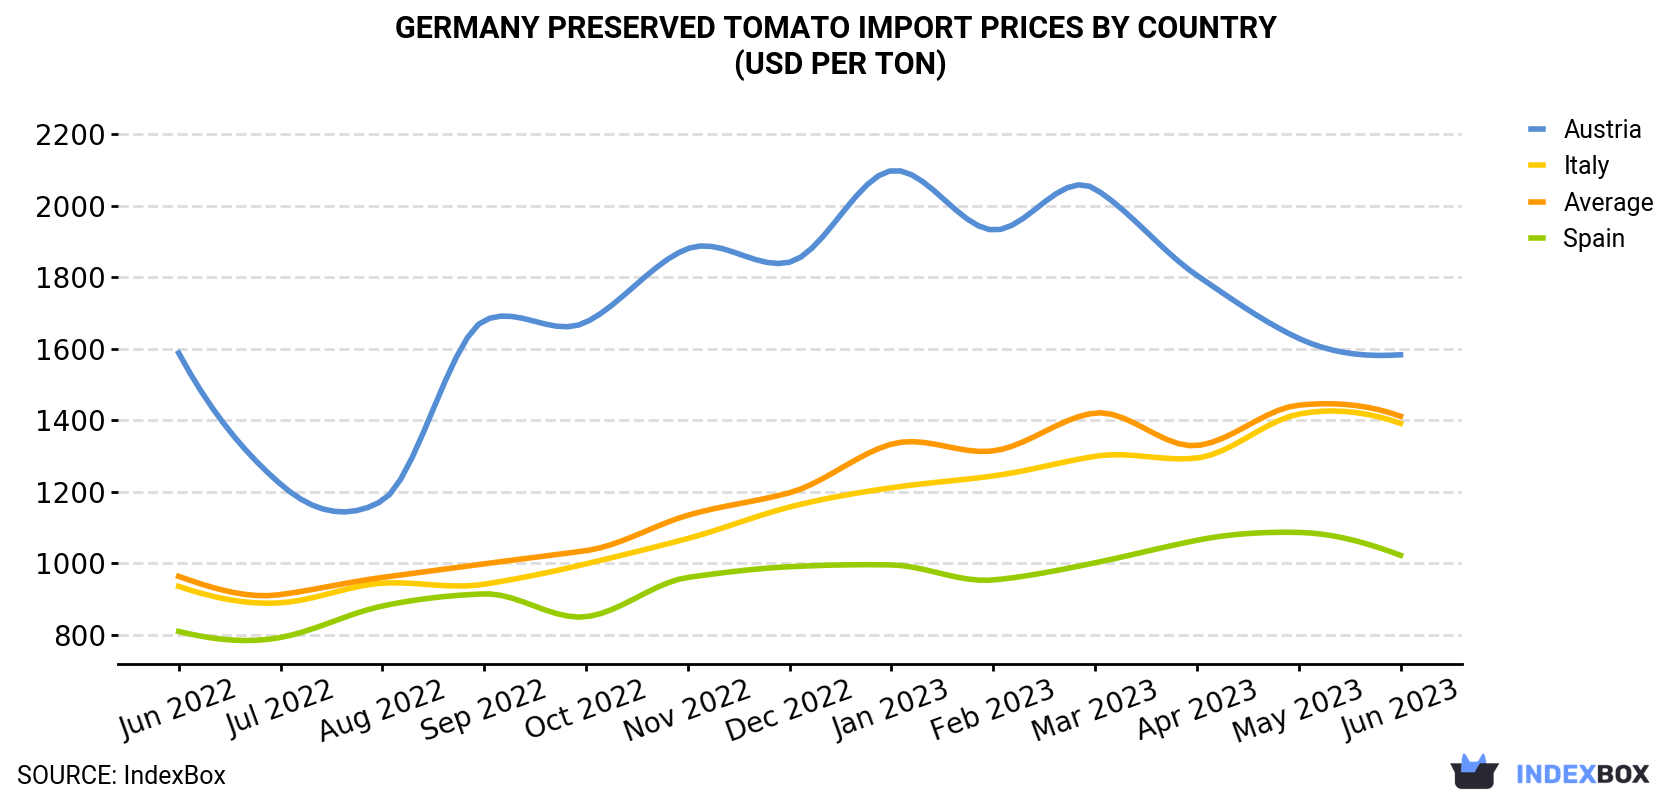 Germany Preserved Tomato Import Prices By Country (USD Per Ton)